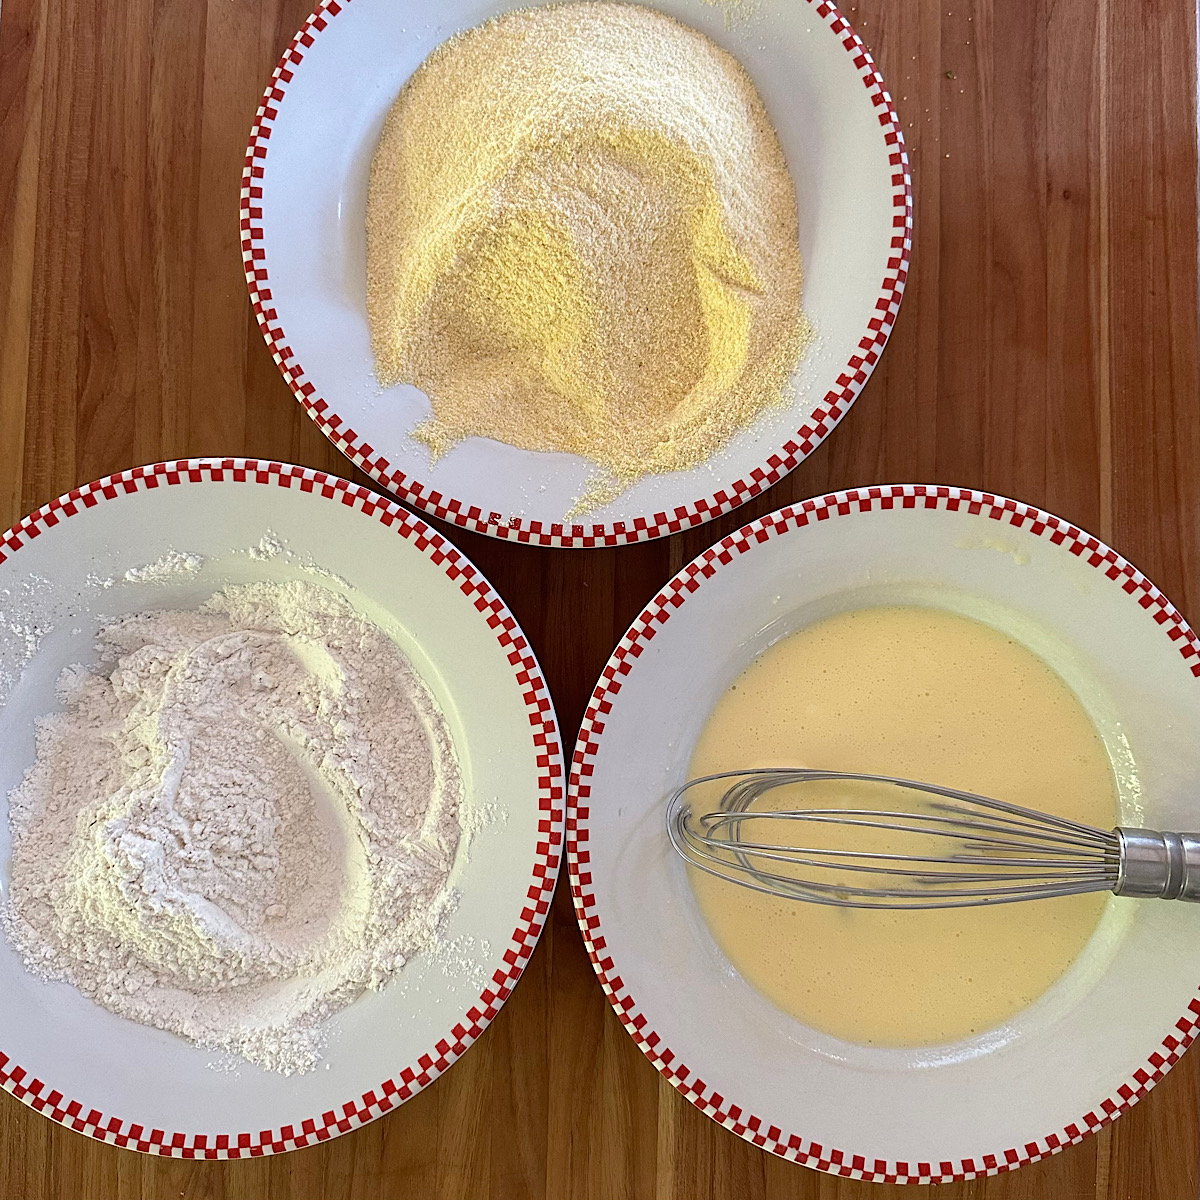 3 bowls in prep for fried green tomatoes: flour, eggs and cornmeal